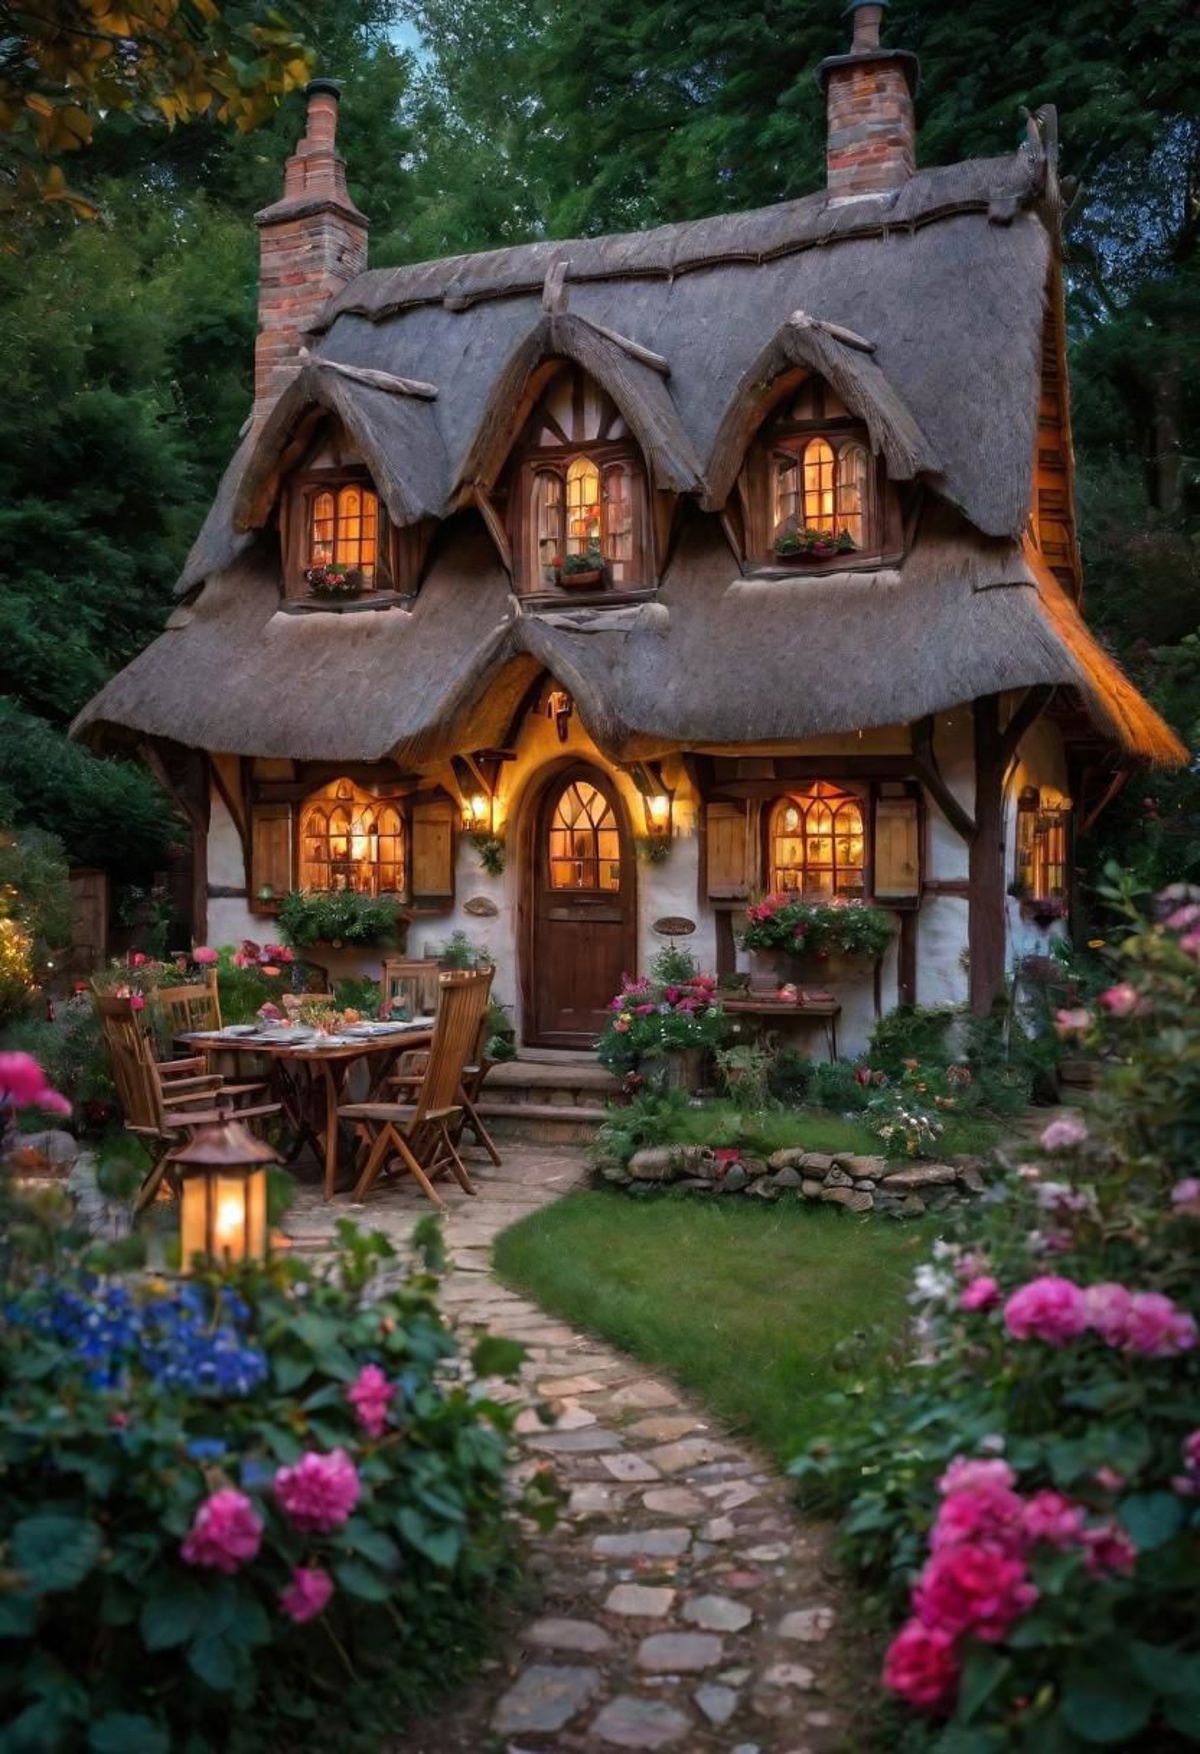 A cozy, fairy tale-like cottage with a garden and a vineyard setting.